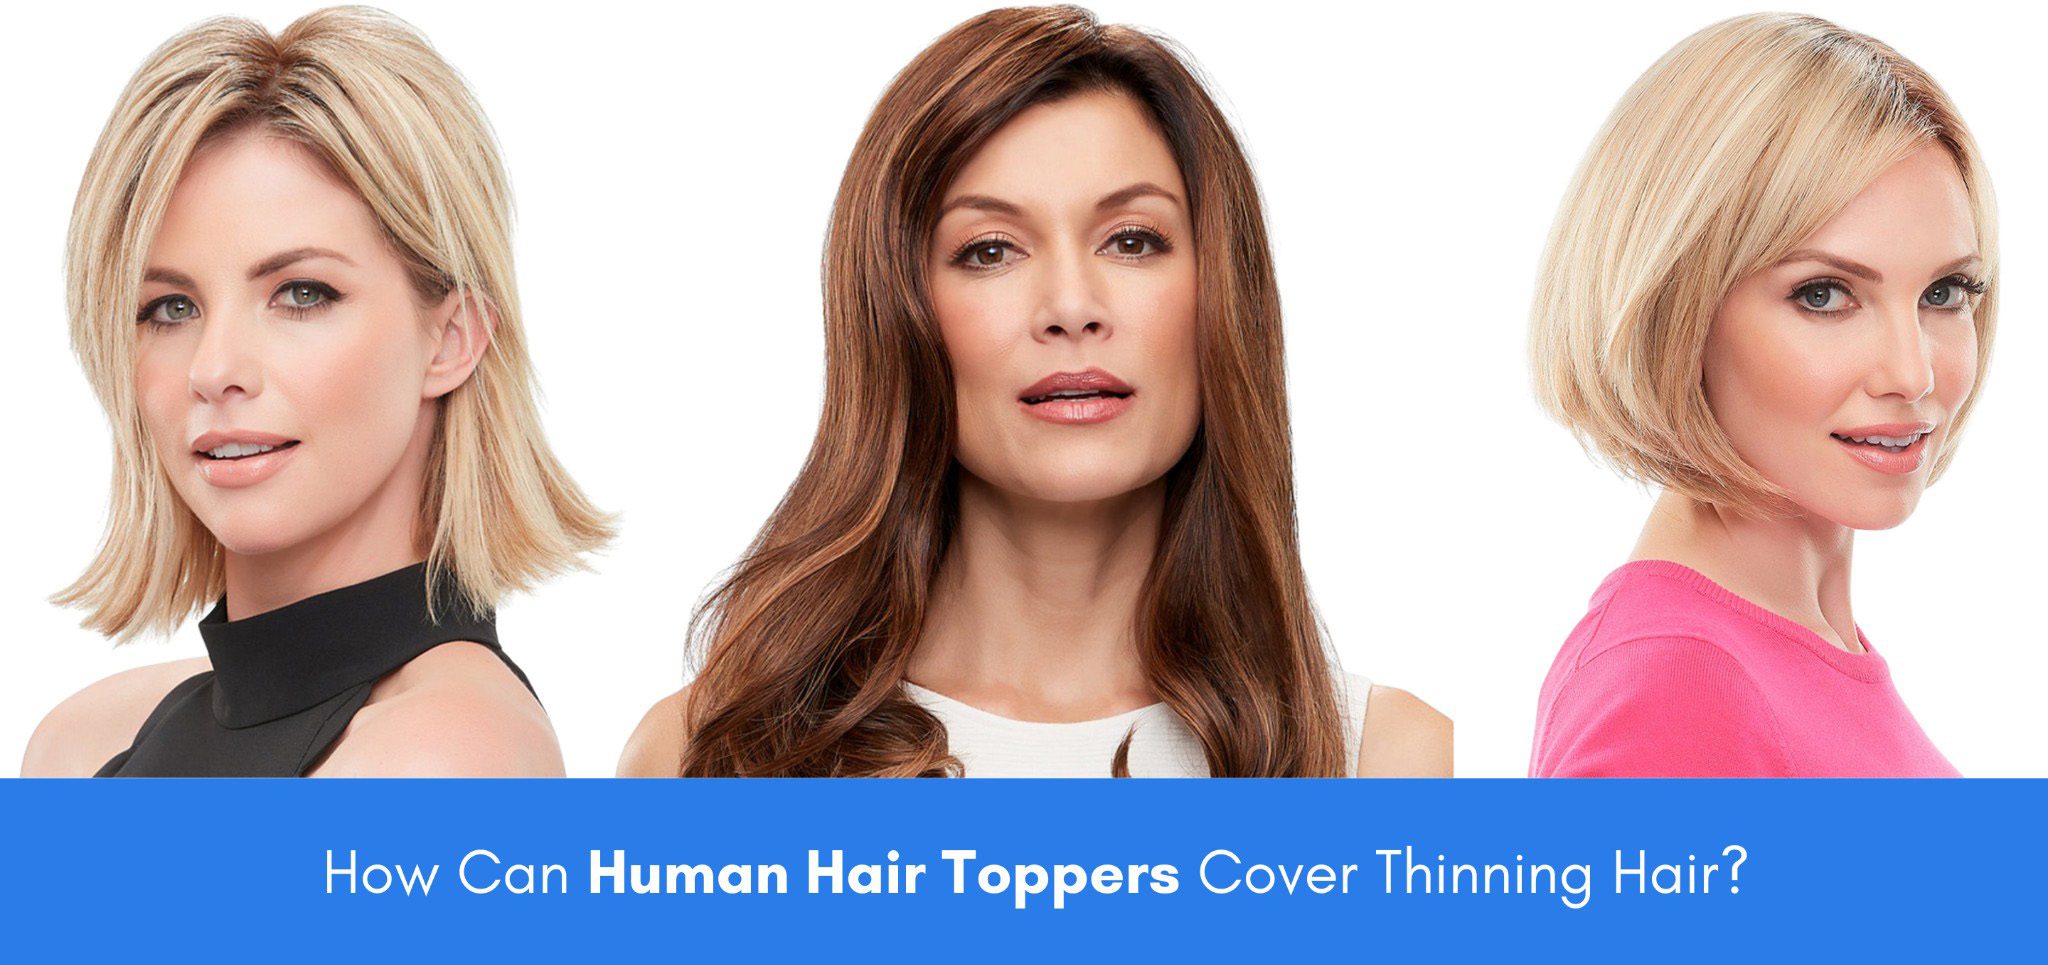 How Can Human Hair Toppers Cover Thinning Hair?